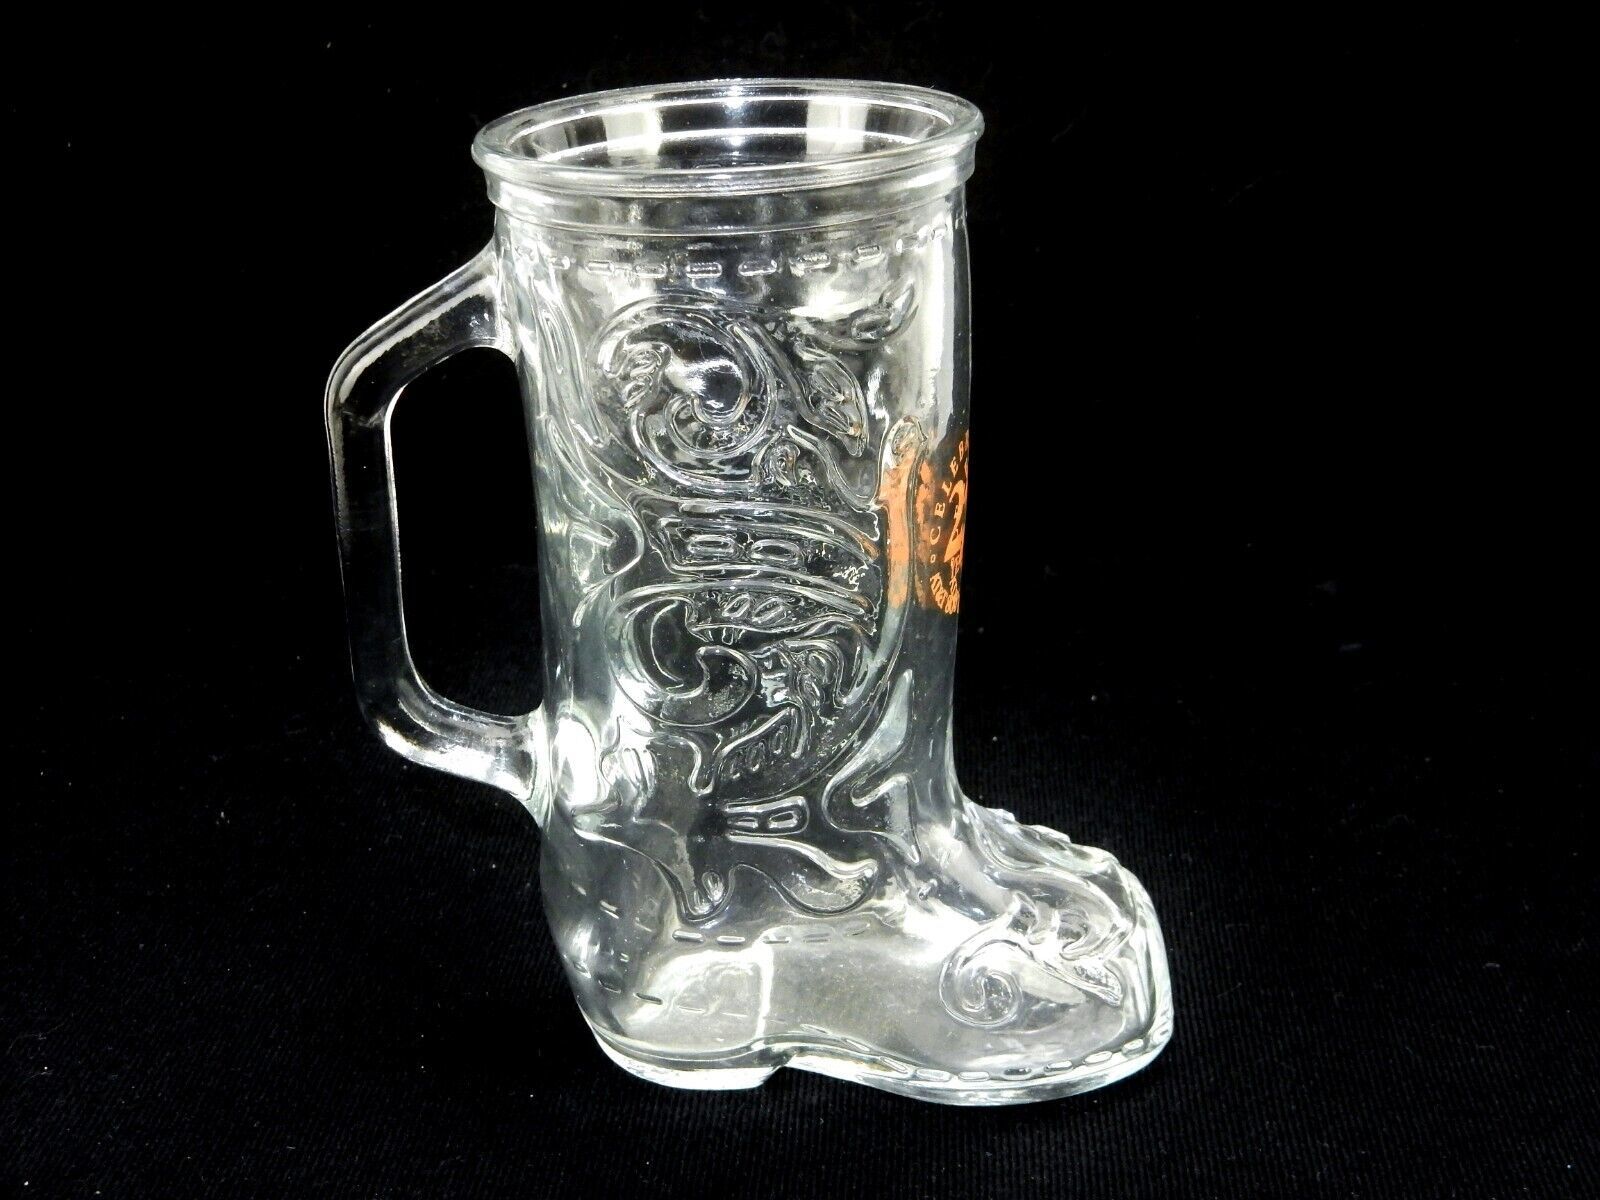 Primary image for Glass Cowboy Boot Mug, 12 Ounce, Scrolls & Waves Relief Art, AT&T Commemorative